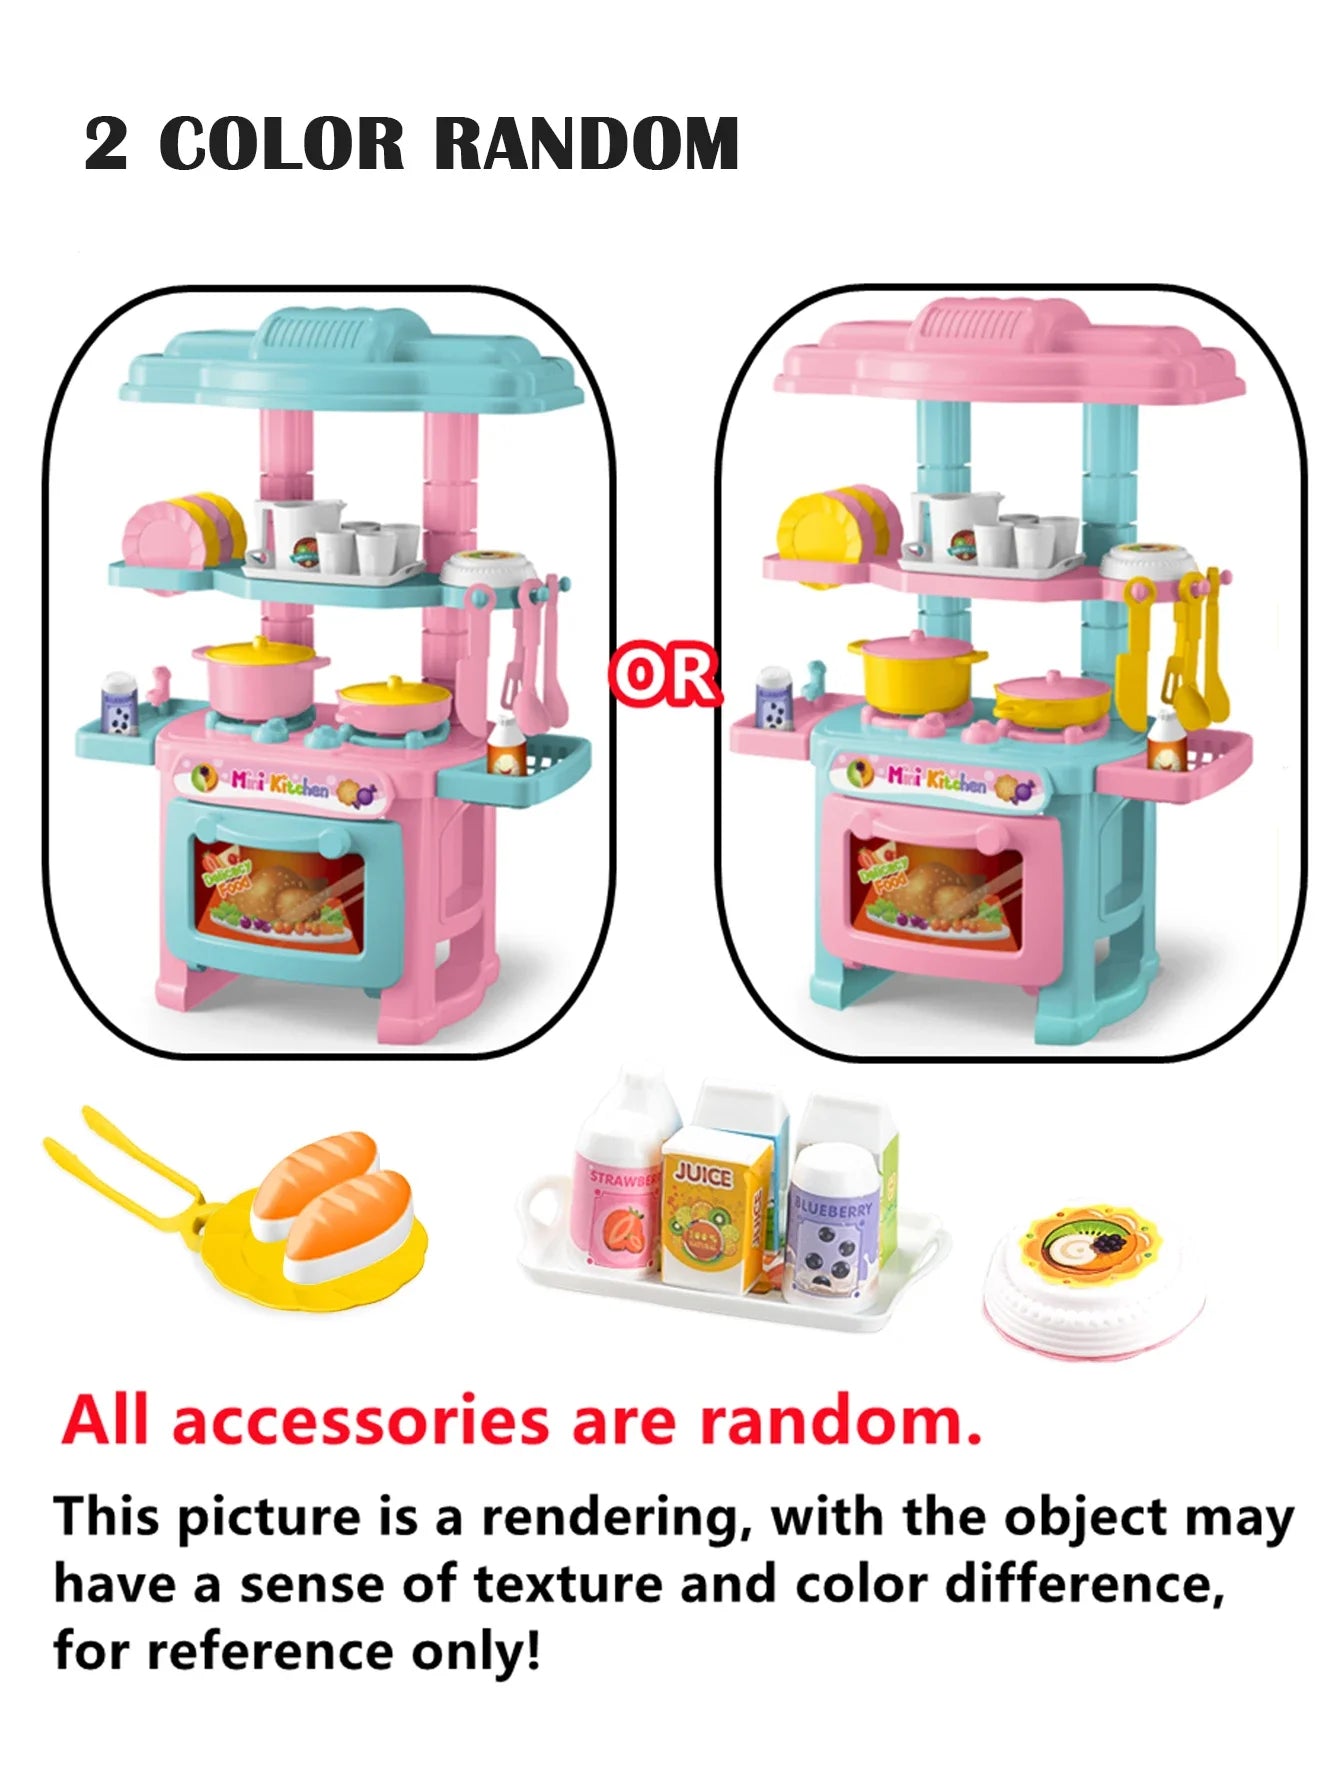 Kids Kitchen Playset with Sink and Oven